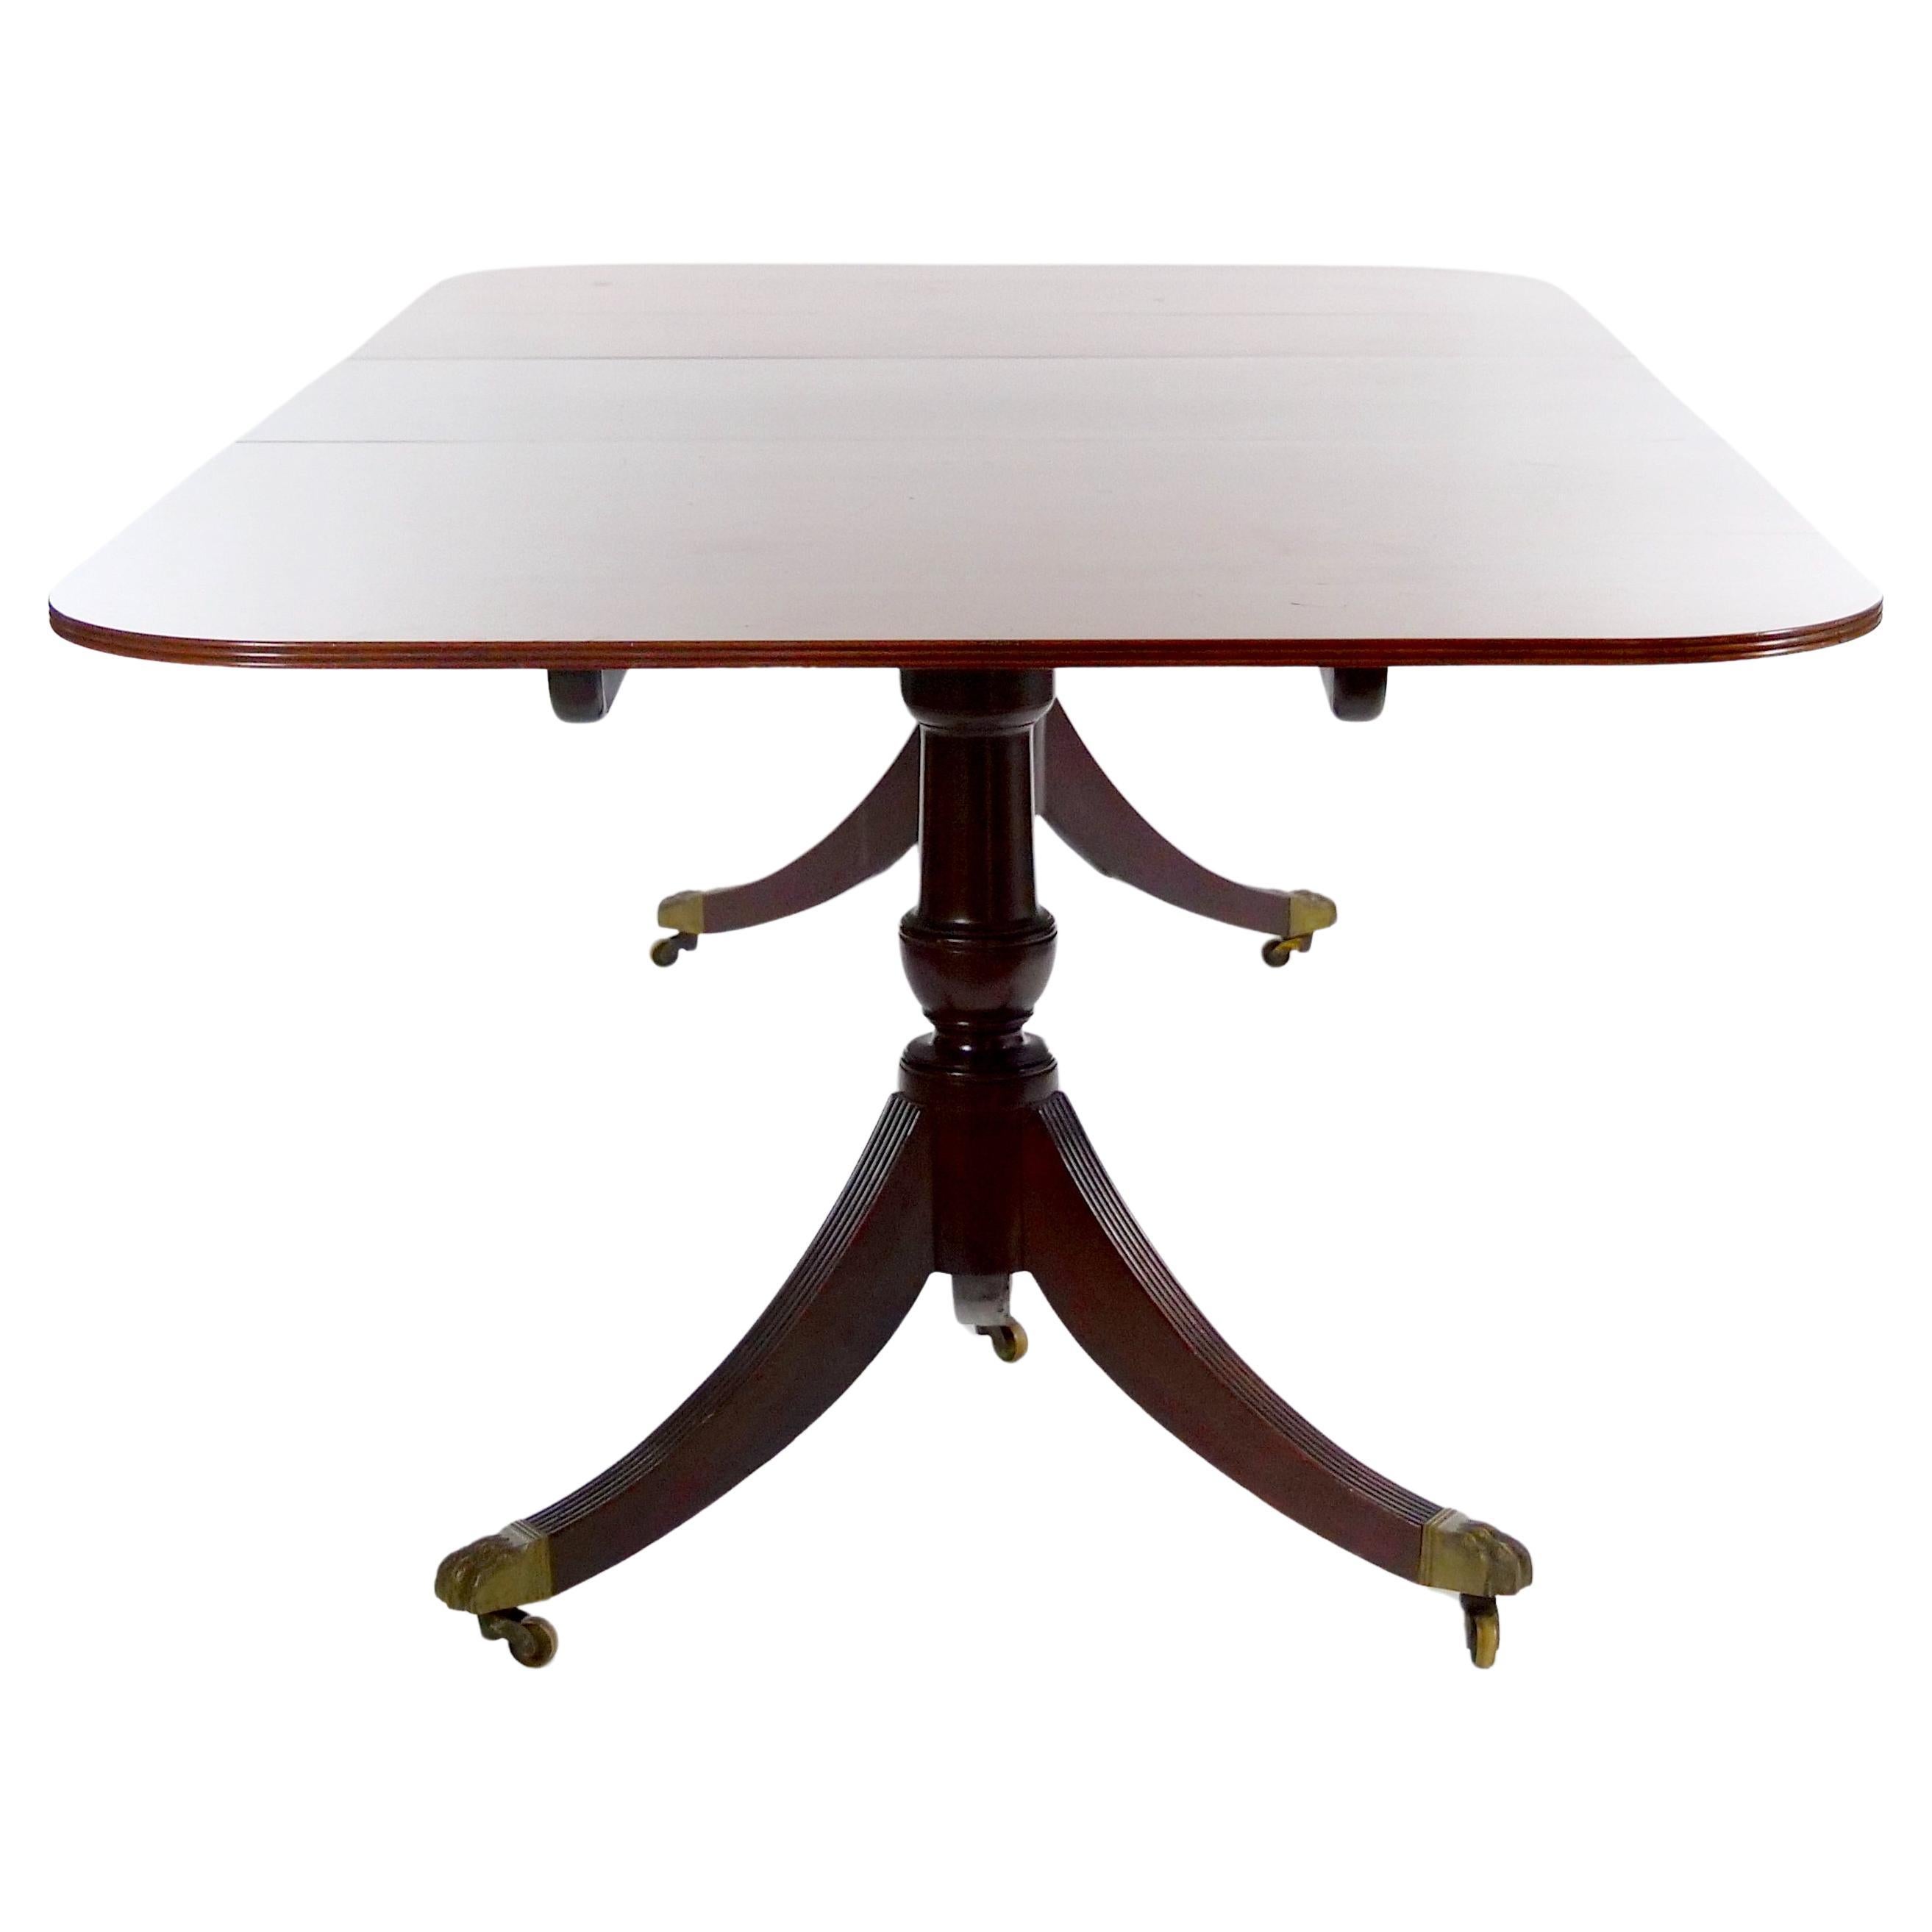 Add a touch of timeless elegance to your dining room with this Mid-19th Century English Burl Walnut mahogany Dining Table in the Regency / American Federal Style.The burl mahogany wood exudes richness and sophistication, capturing the essence of